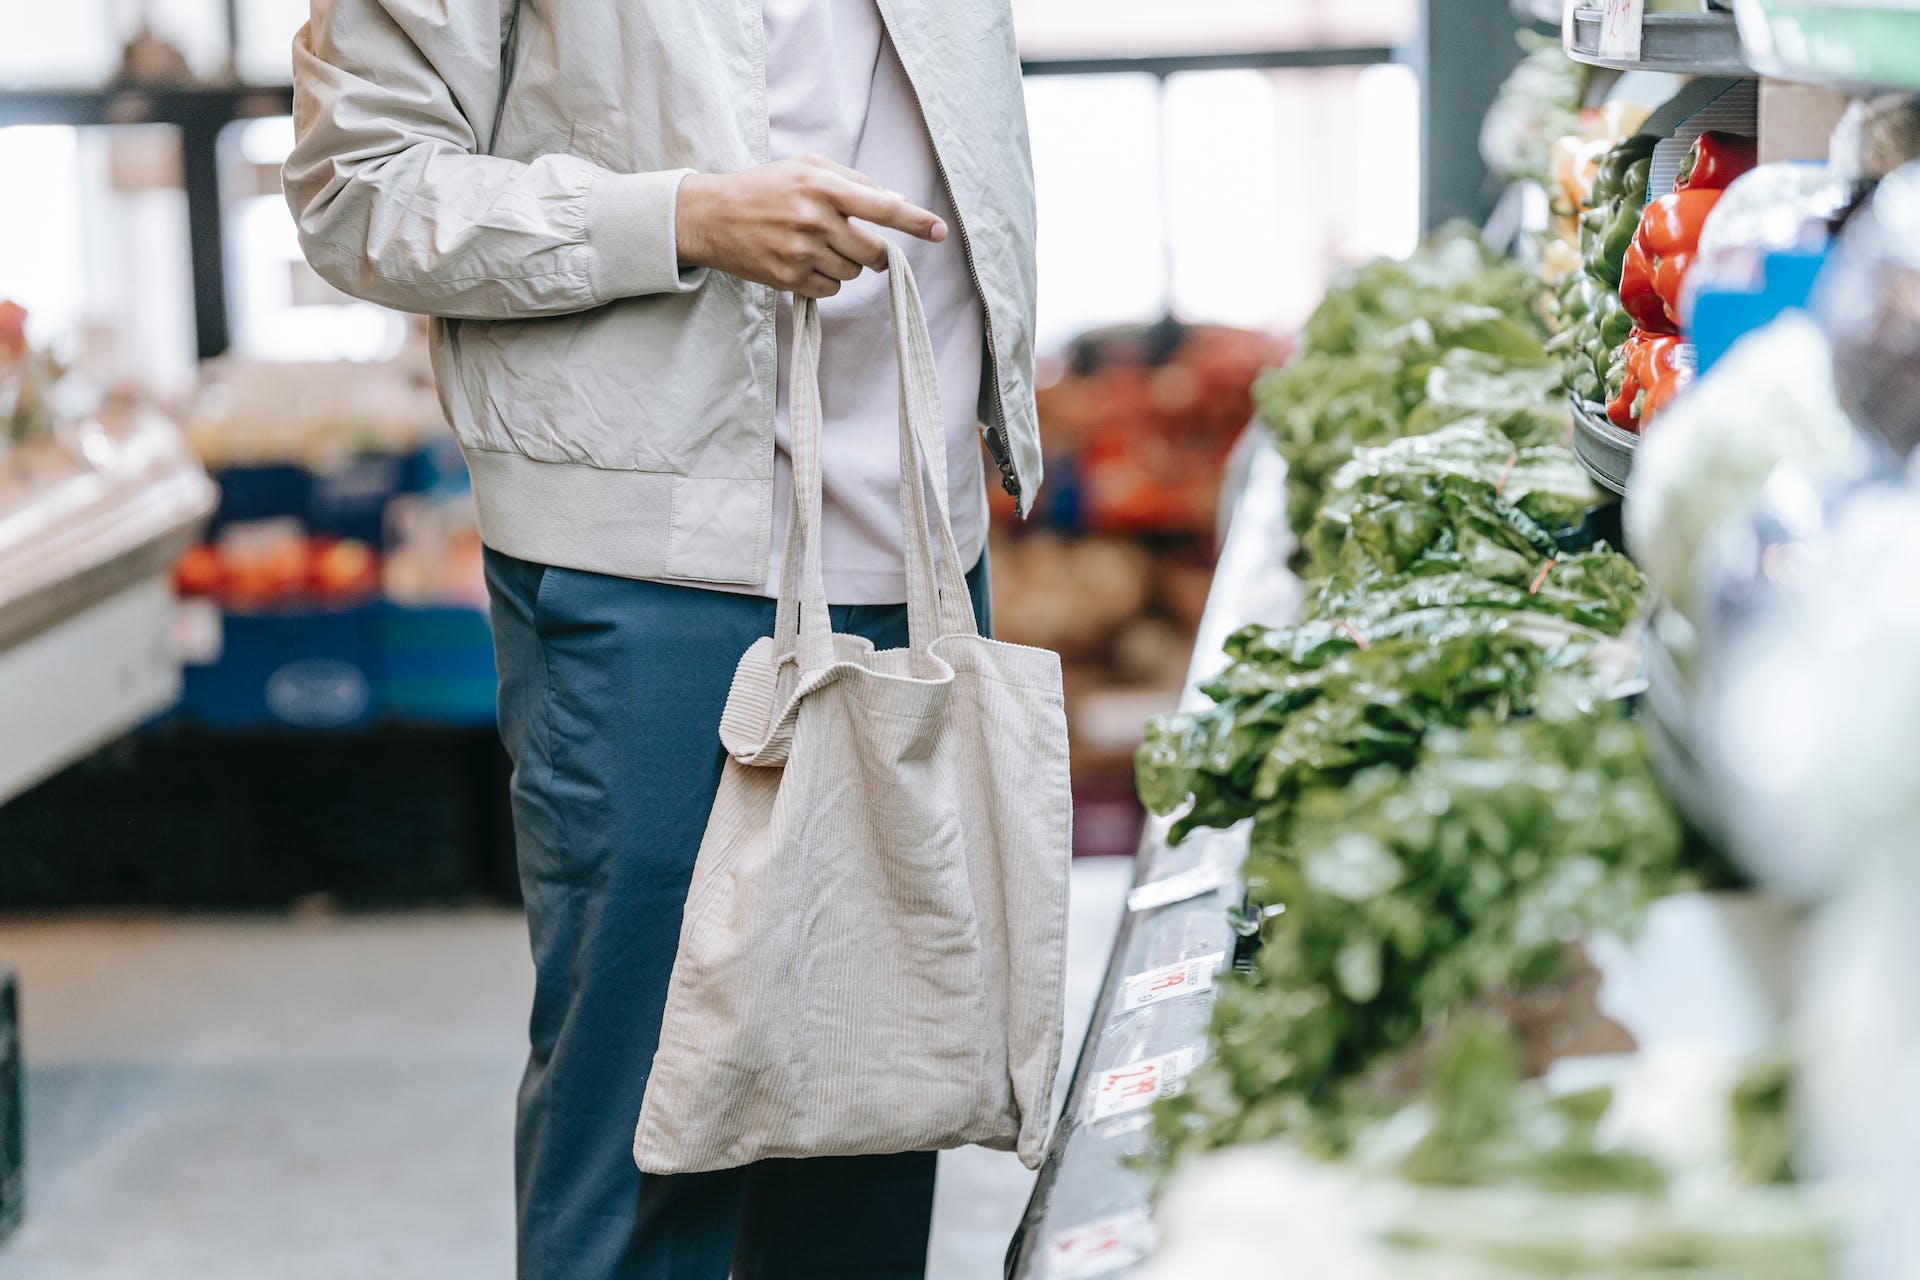 Person in grocery store | Source: Pexels